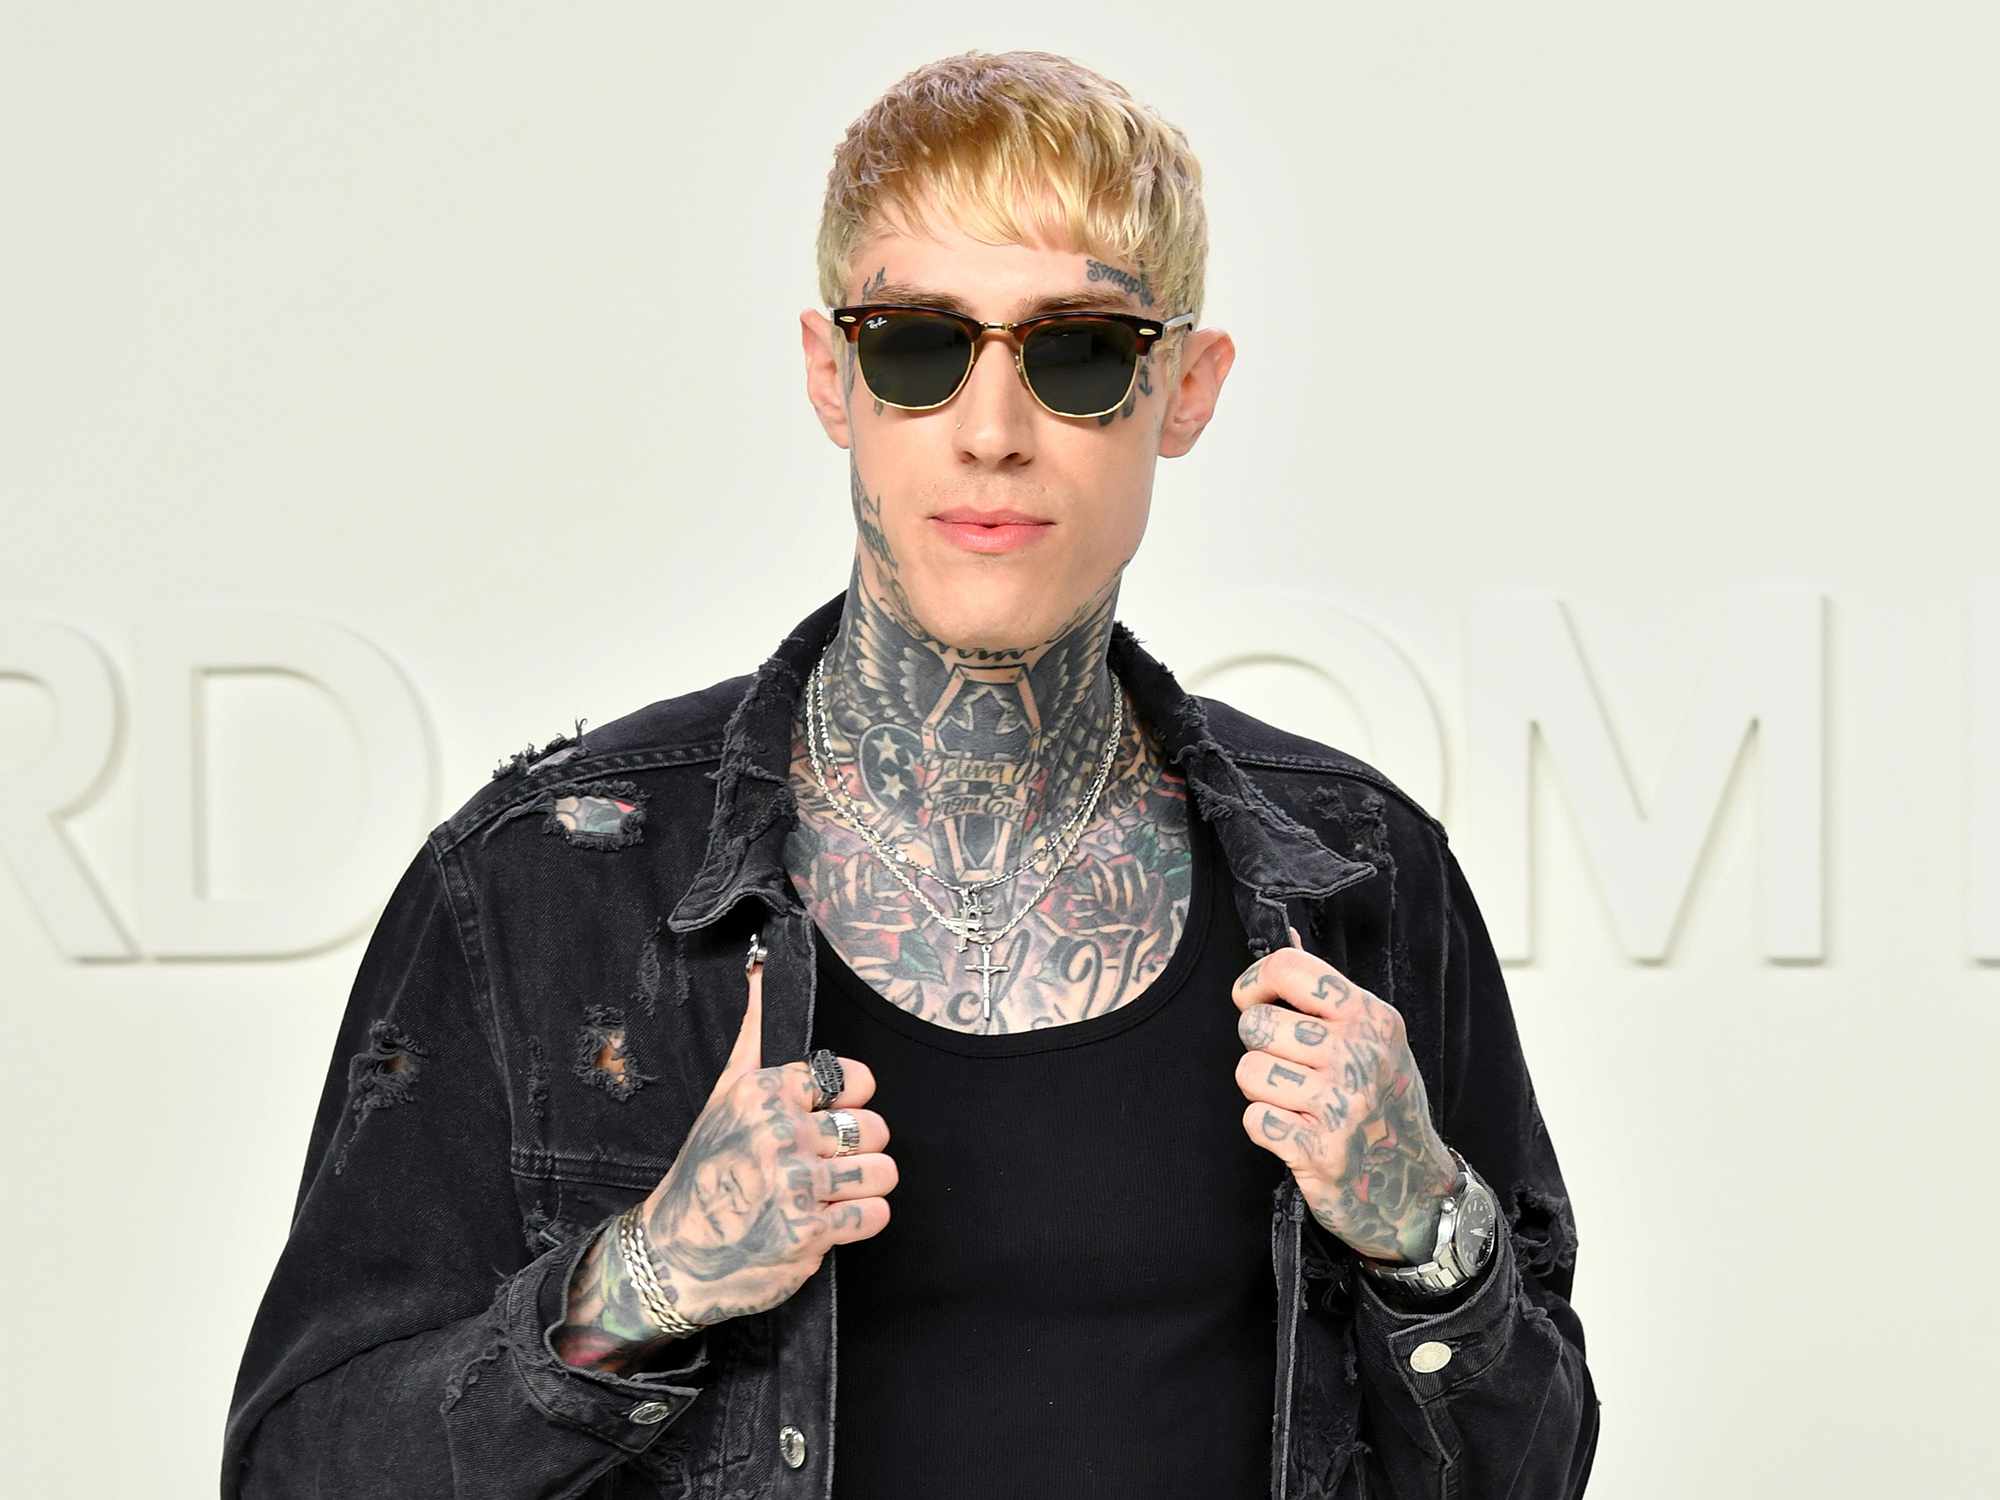 Trace Cyrus attends the Tom Ford AW20 Show at Milk Studios on February 07, 2020 in Hollywood, California